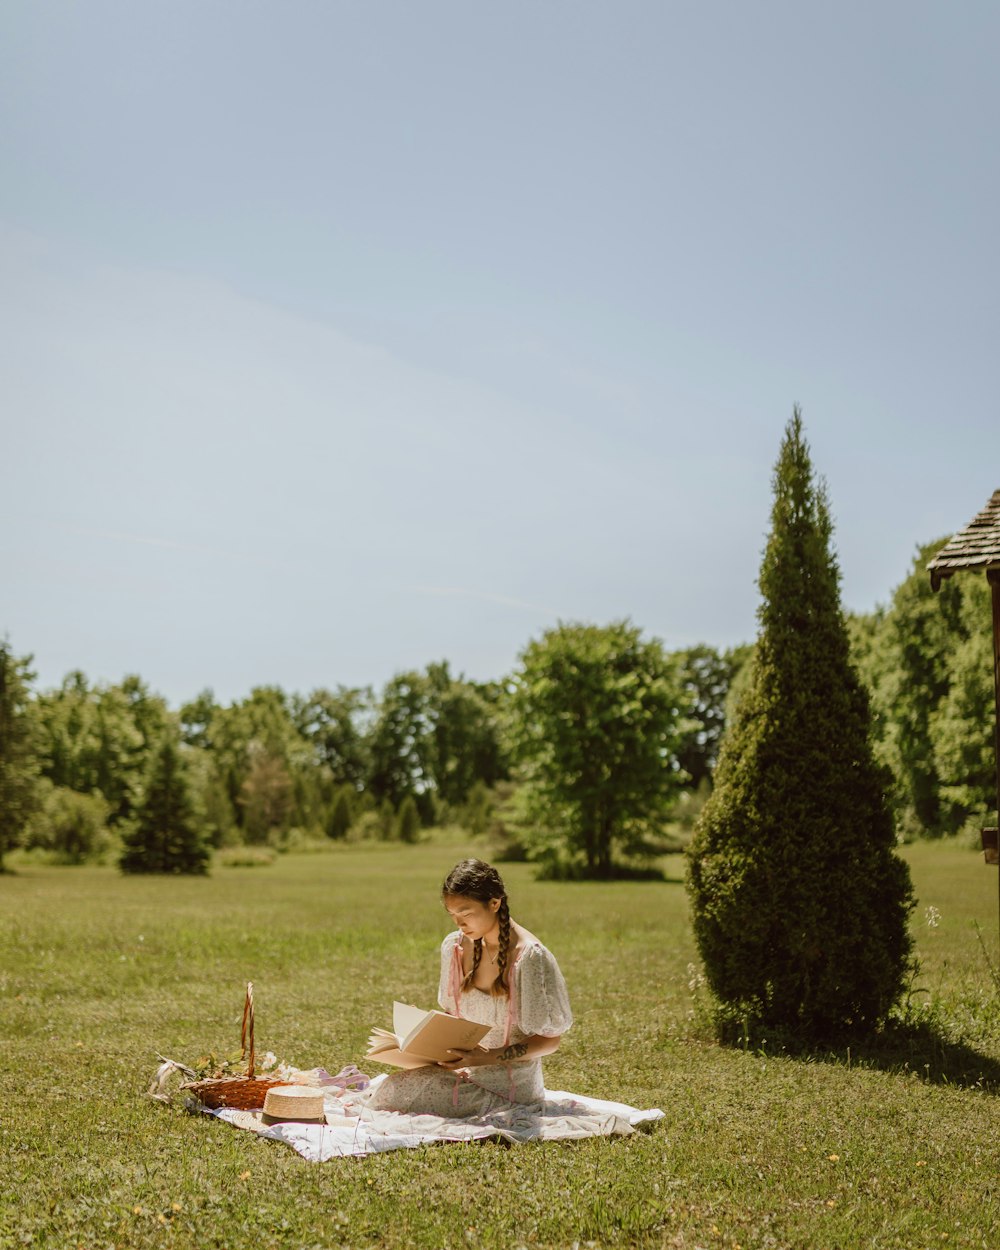 woman in white dress sitting on green grass field during daytime